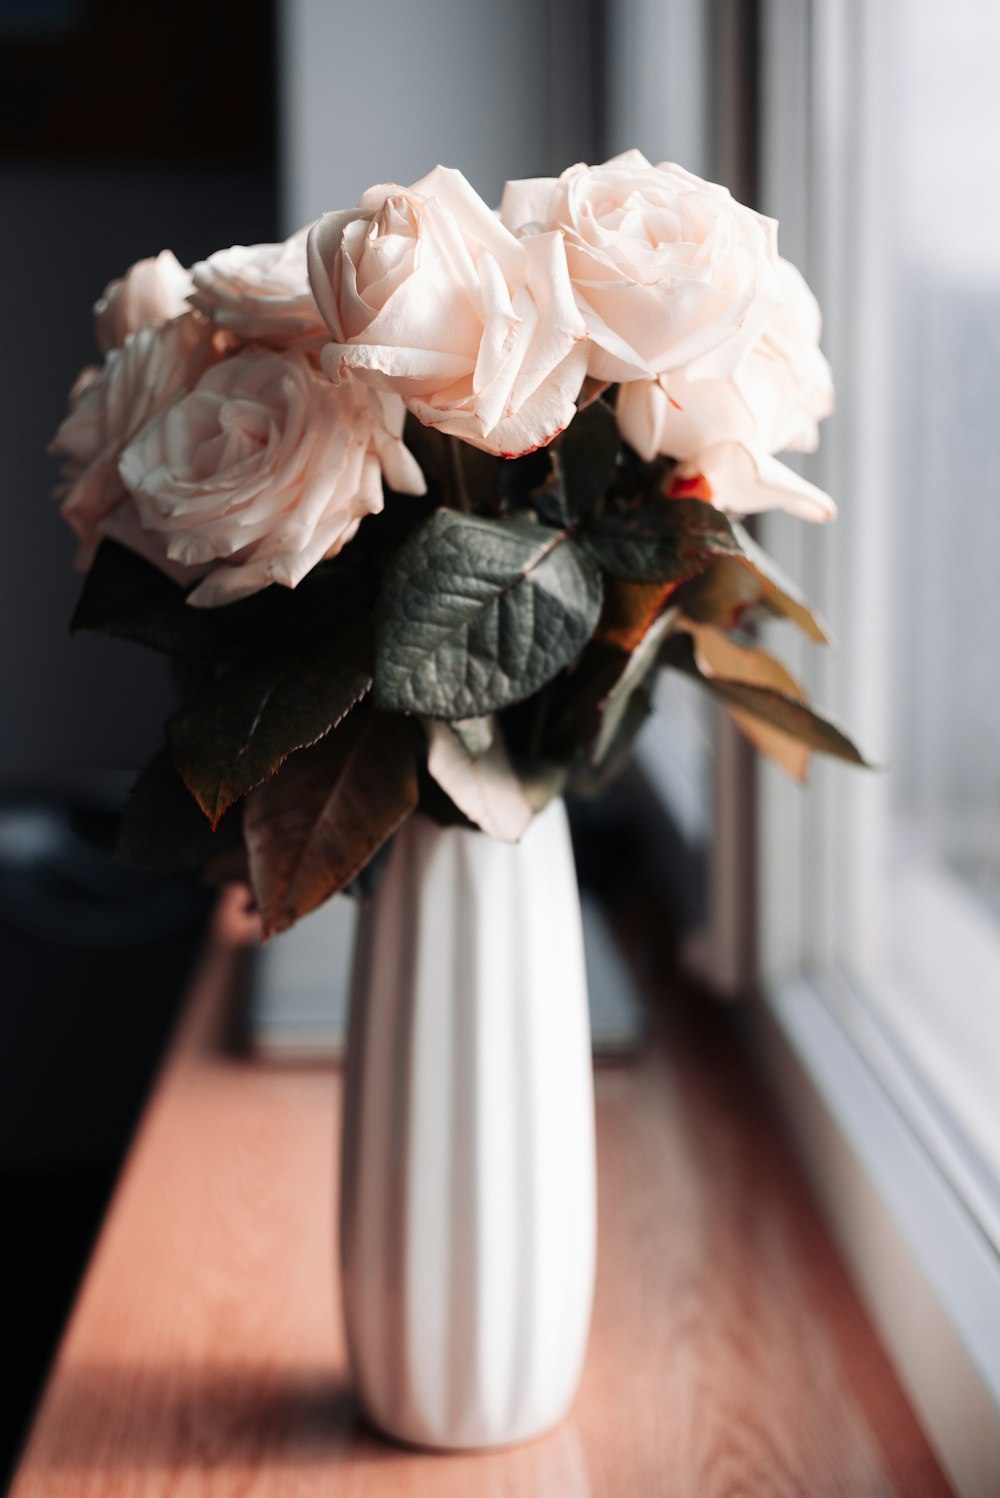 a white vase filled with pink flowers on a window sill